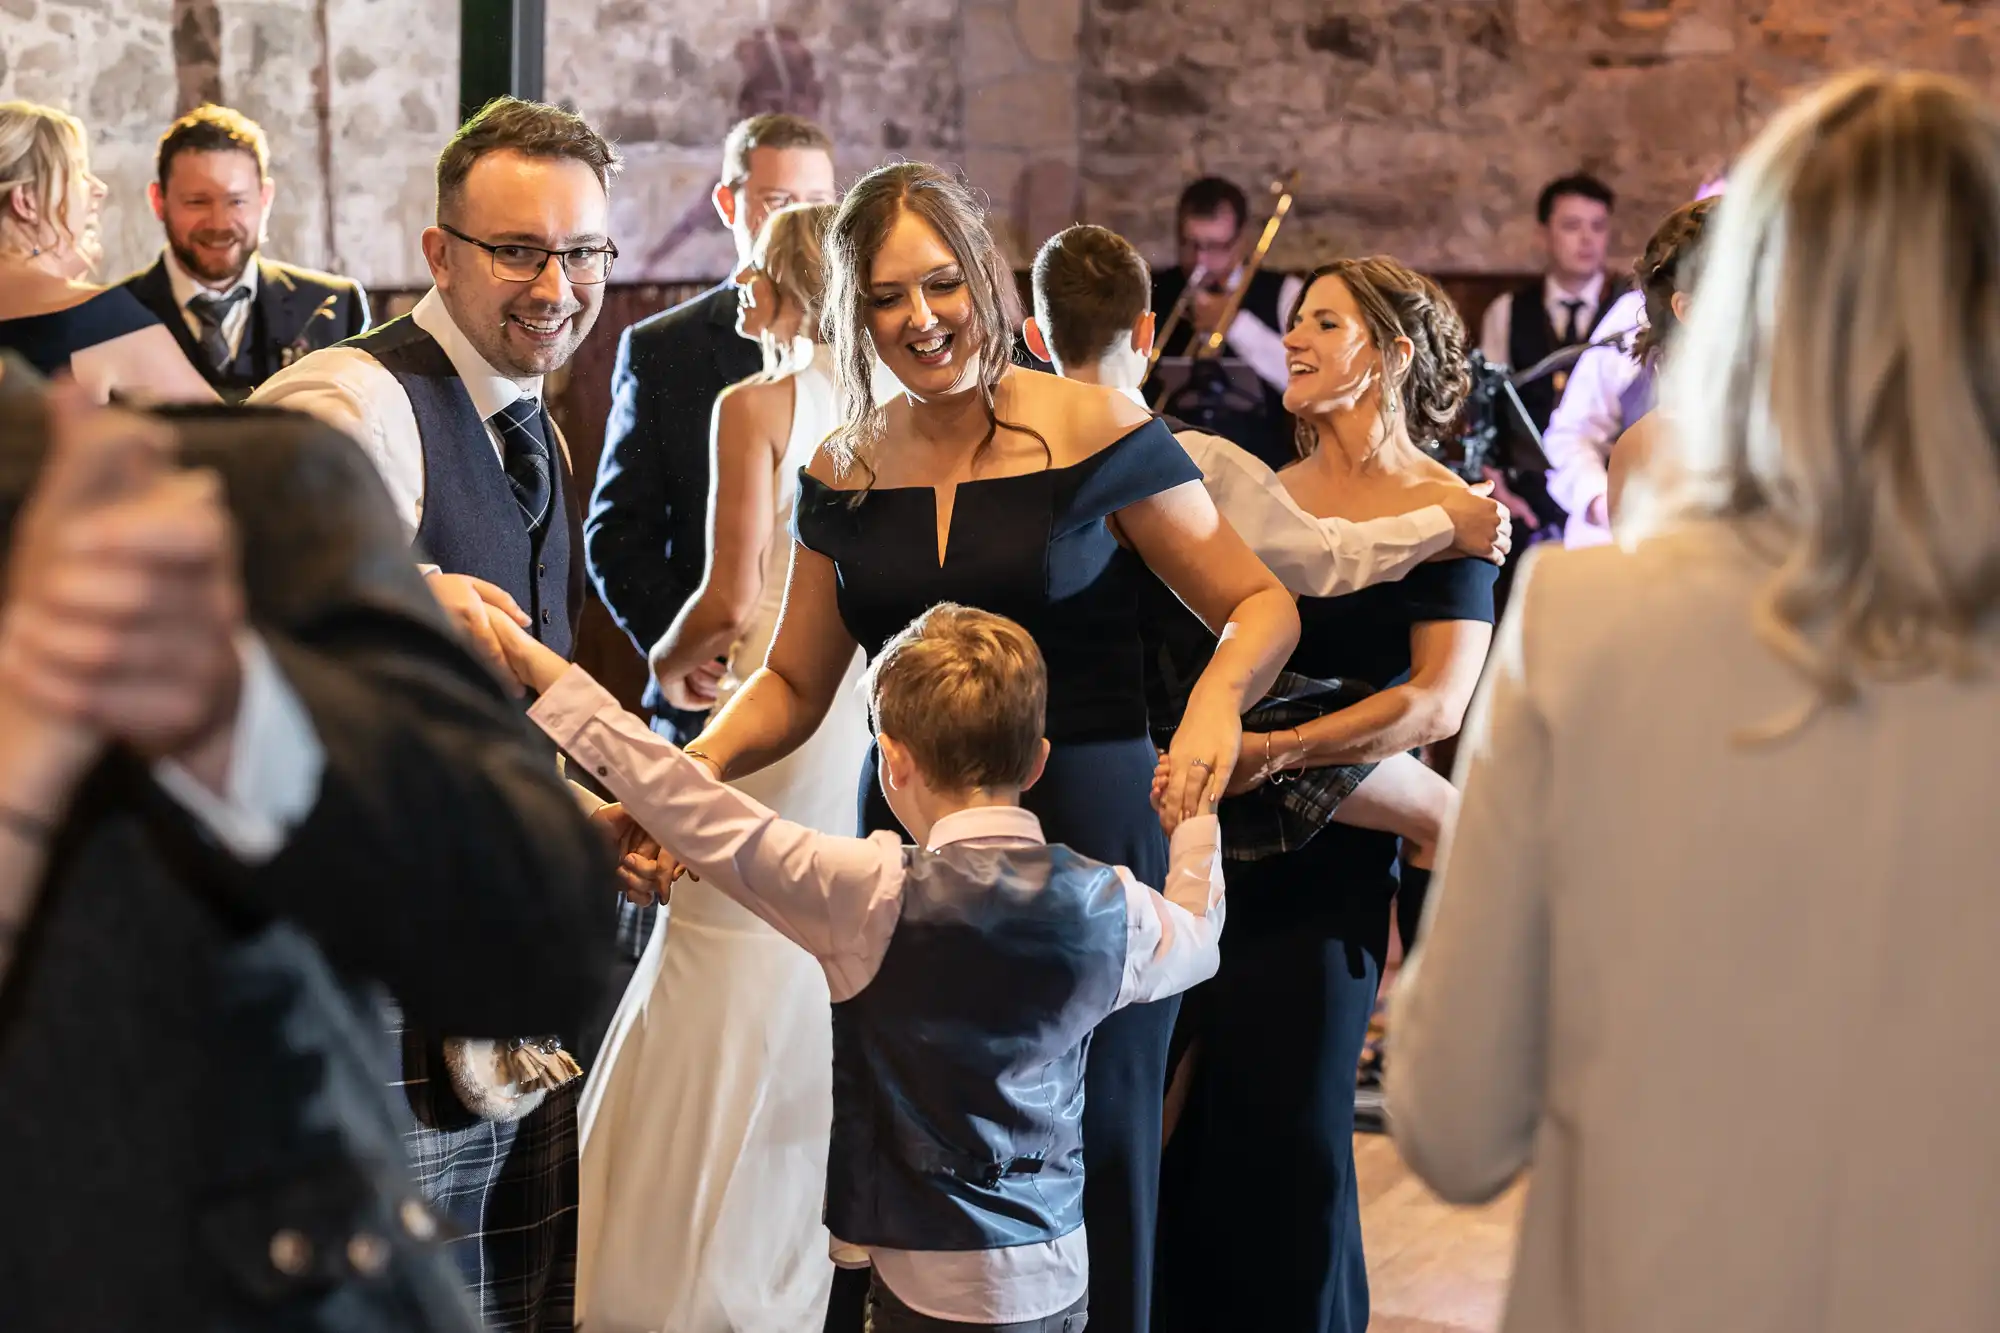 A joyful scene at a wedding reception with guests dancing and smiling, including a couple with a young boy in a formal setting.